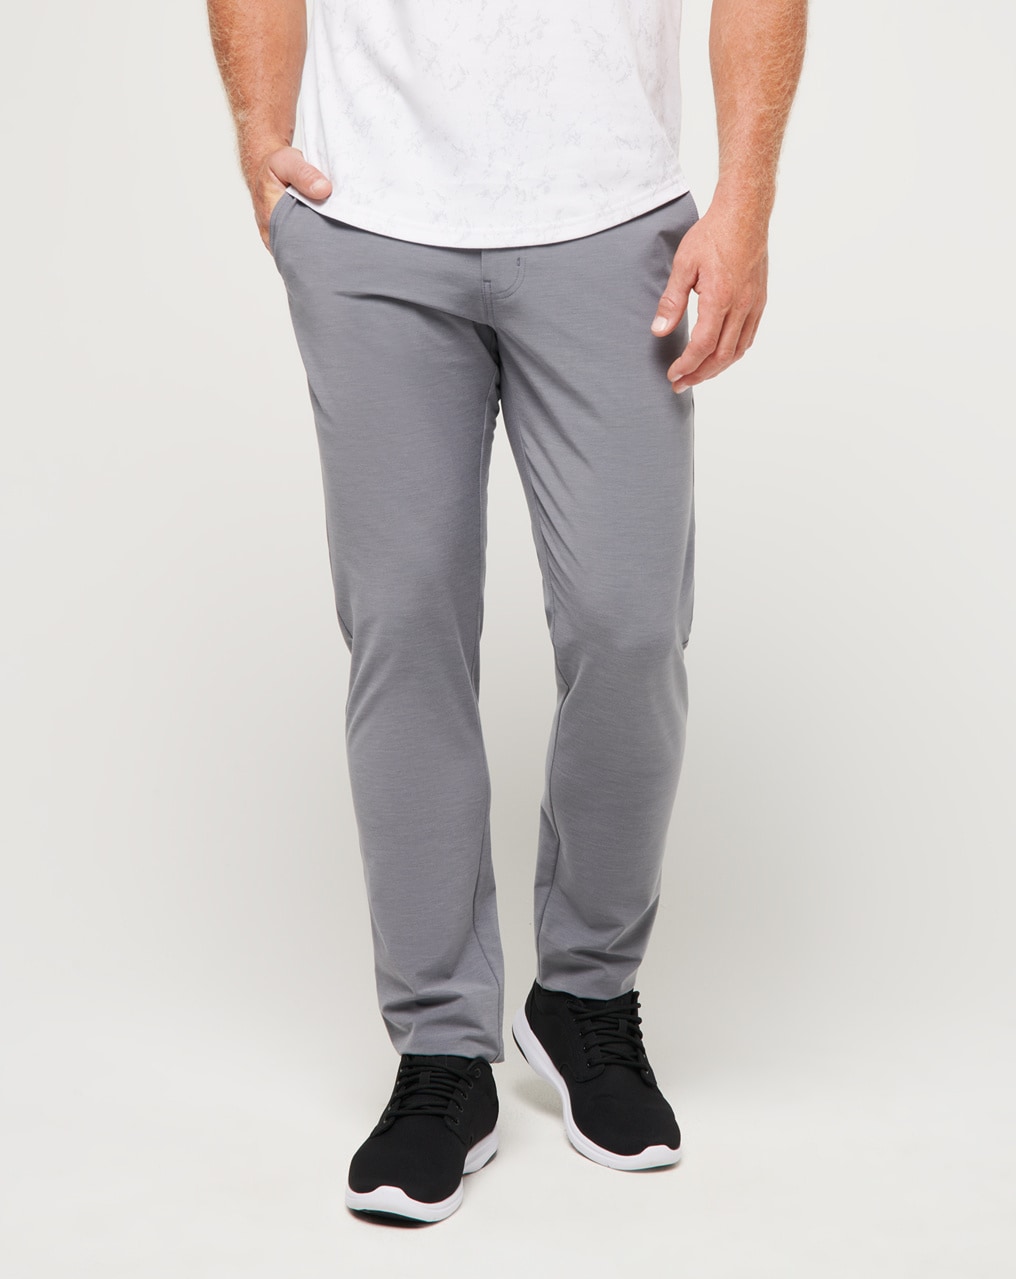 Aiden 4-Way Stretch Chino Pant